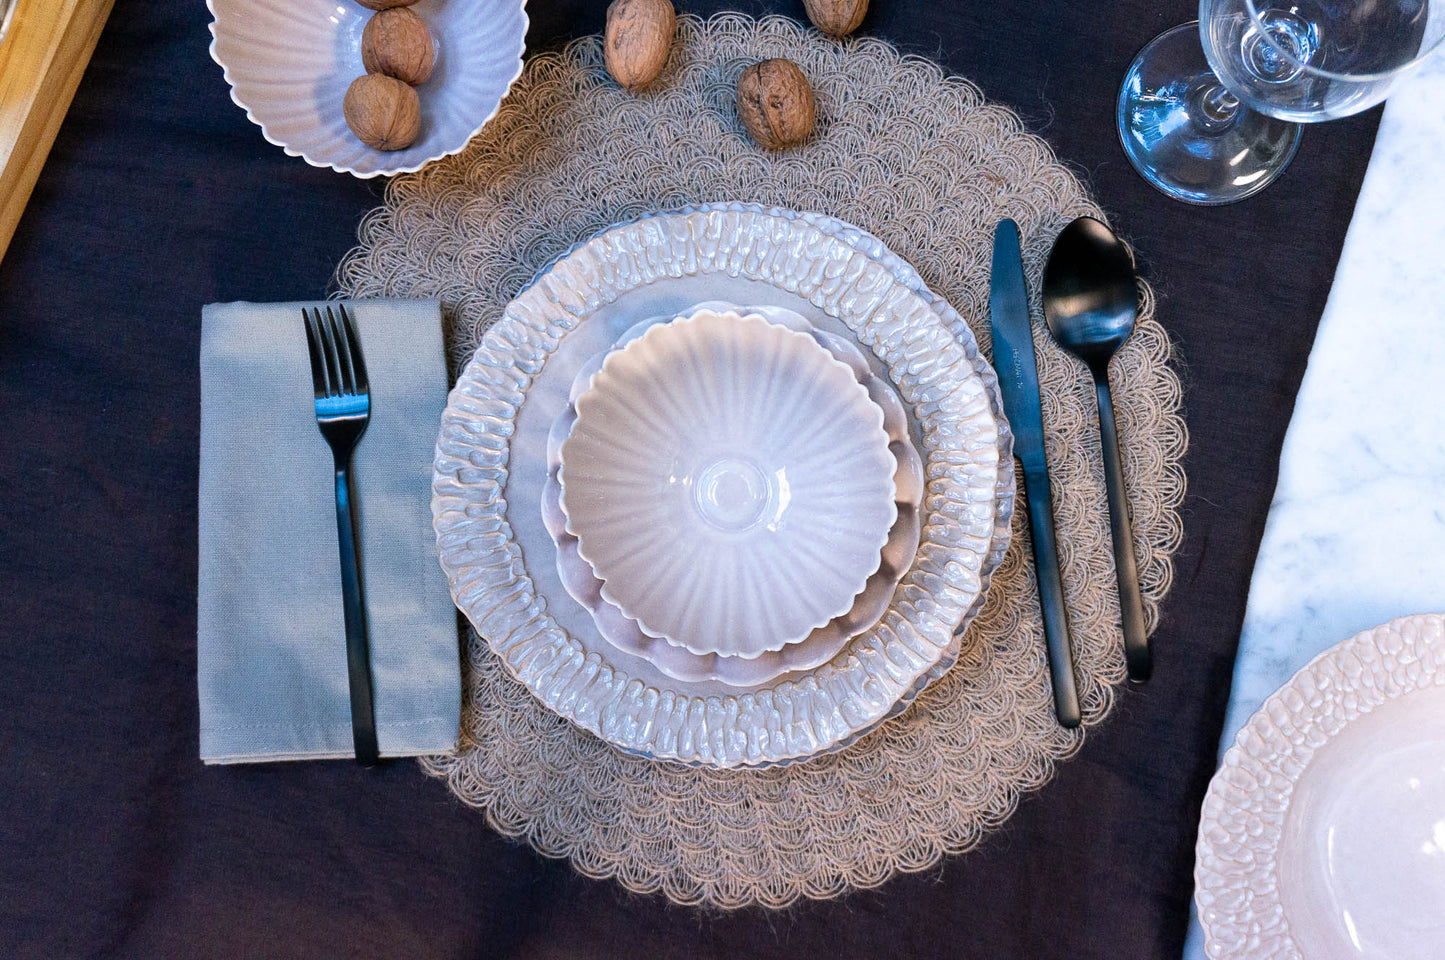 Textured Rim 4-Piece Place Setting | Table Setting